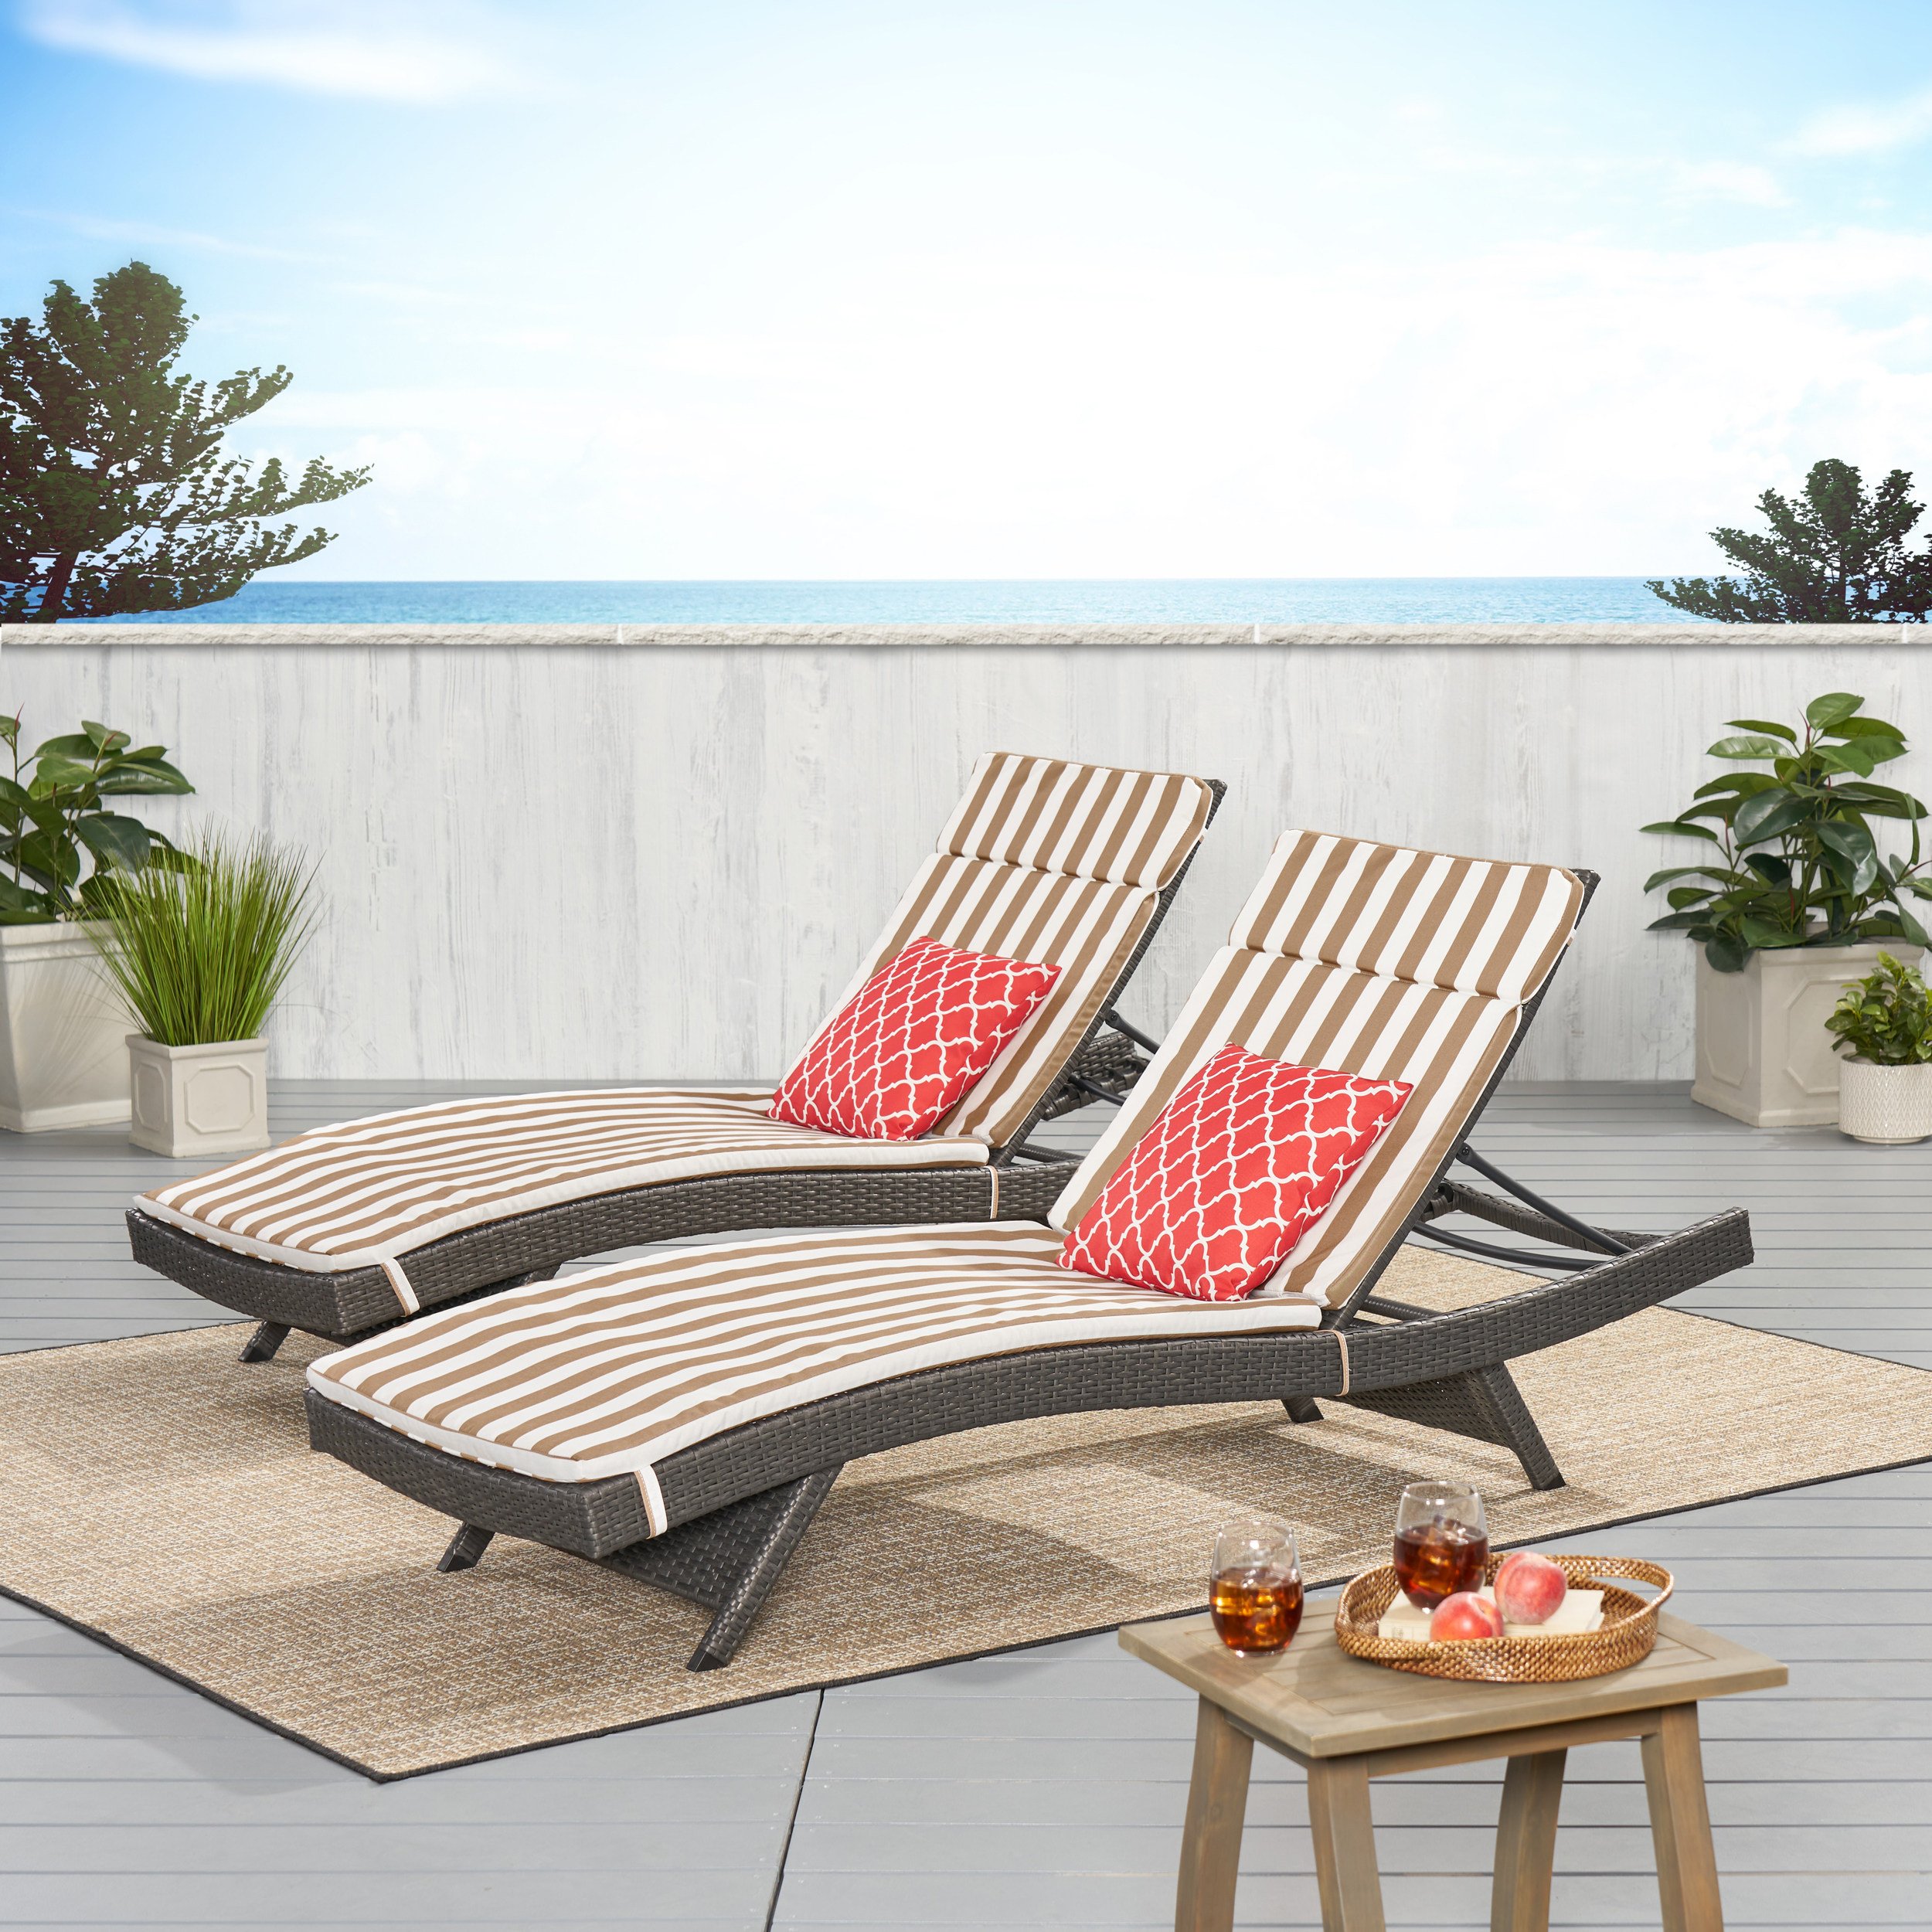 Lakeport Outdoor Wicker Lounge With Water Resistant Cushion (Set Of 2) - Dup - Brown/white Cushion, Gray